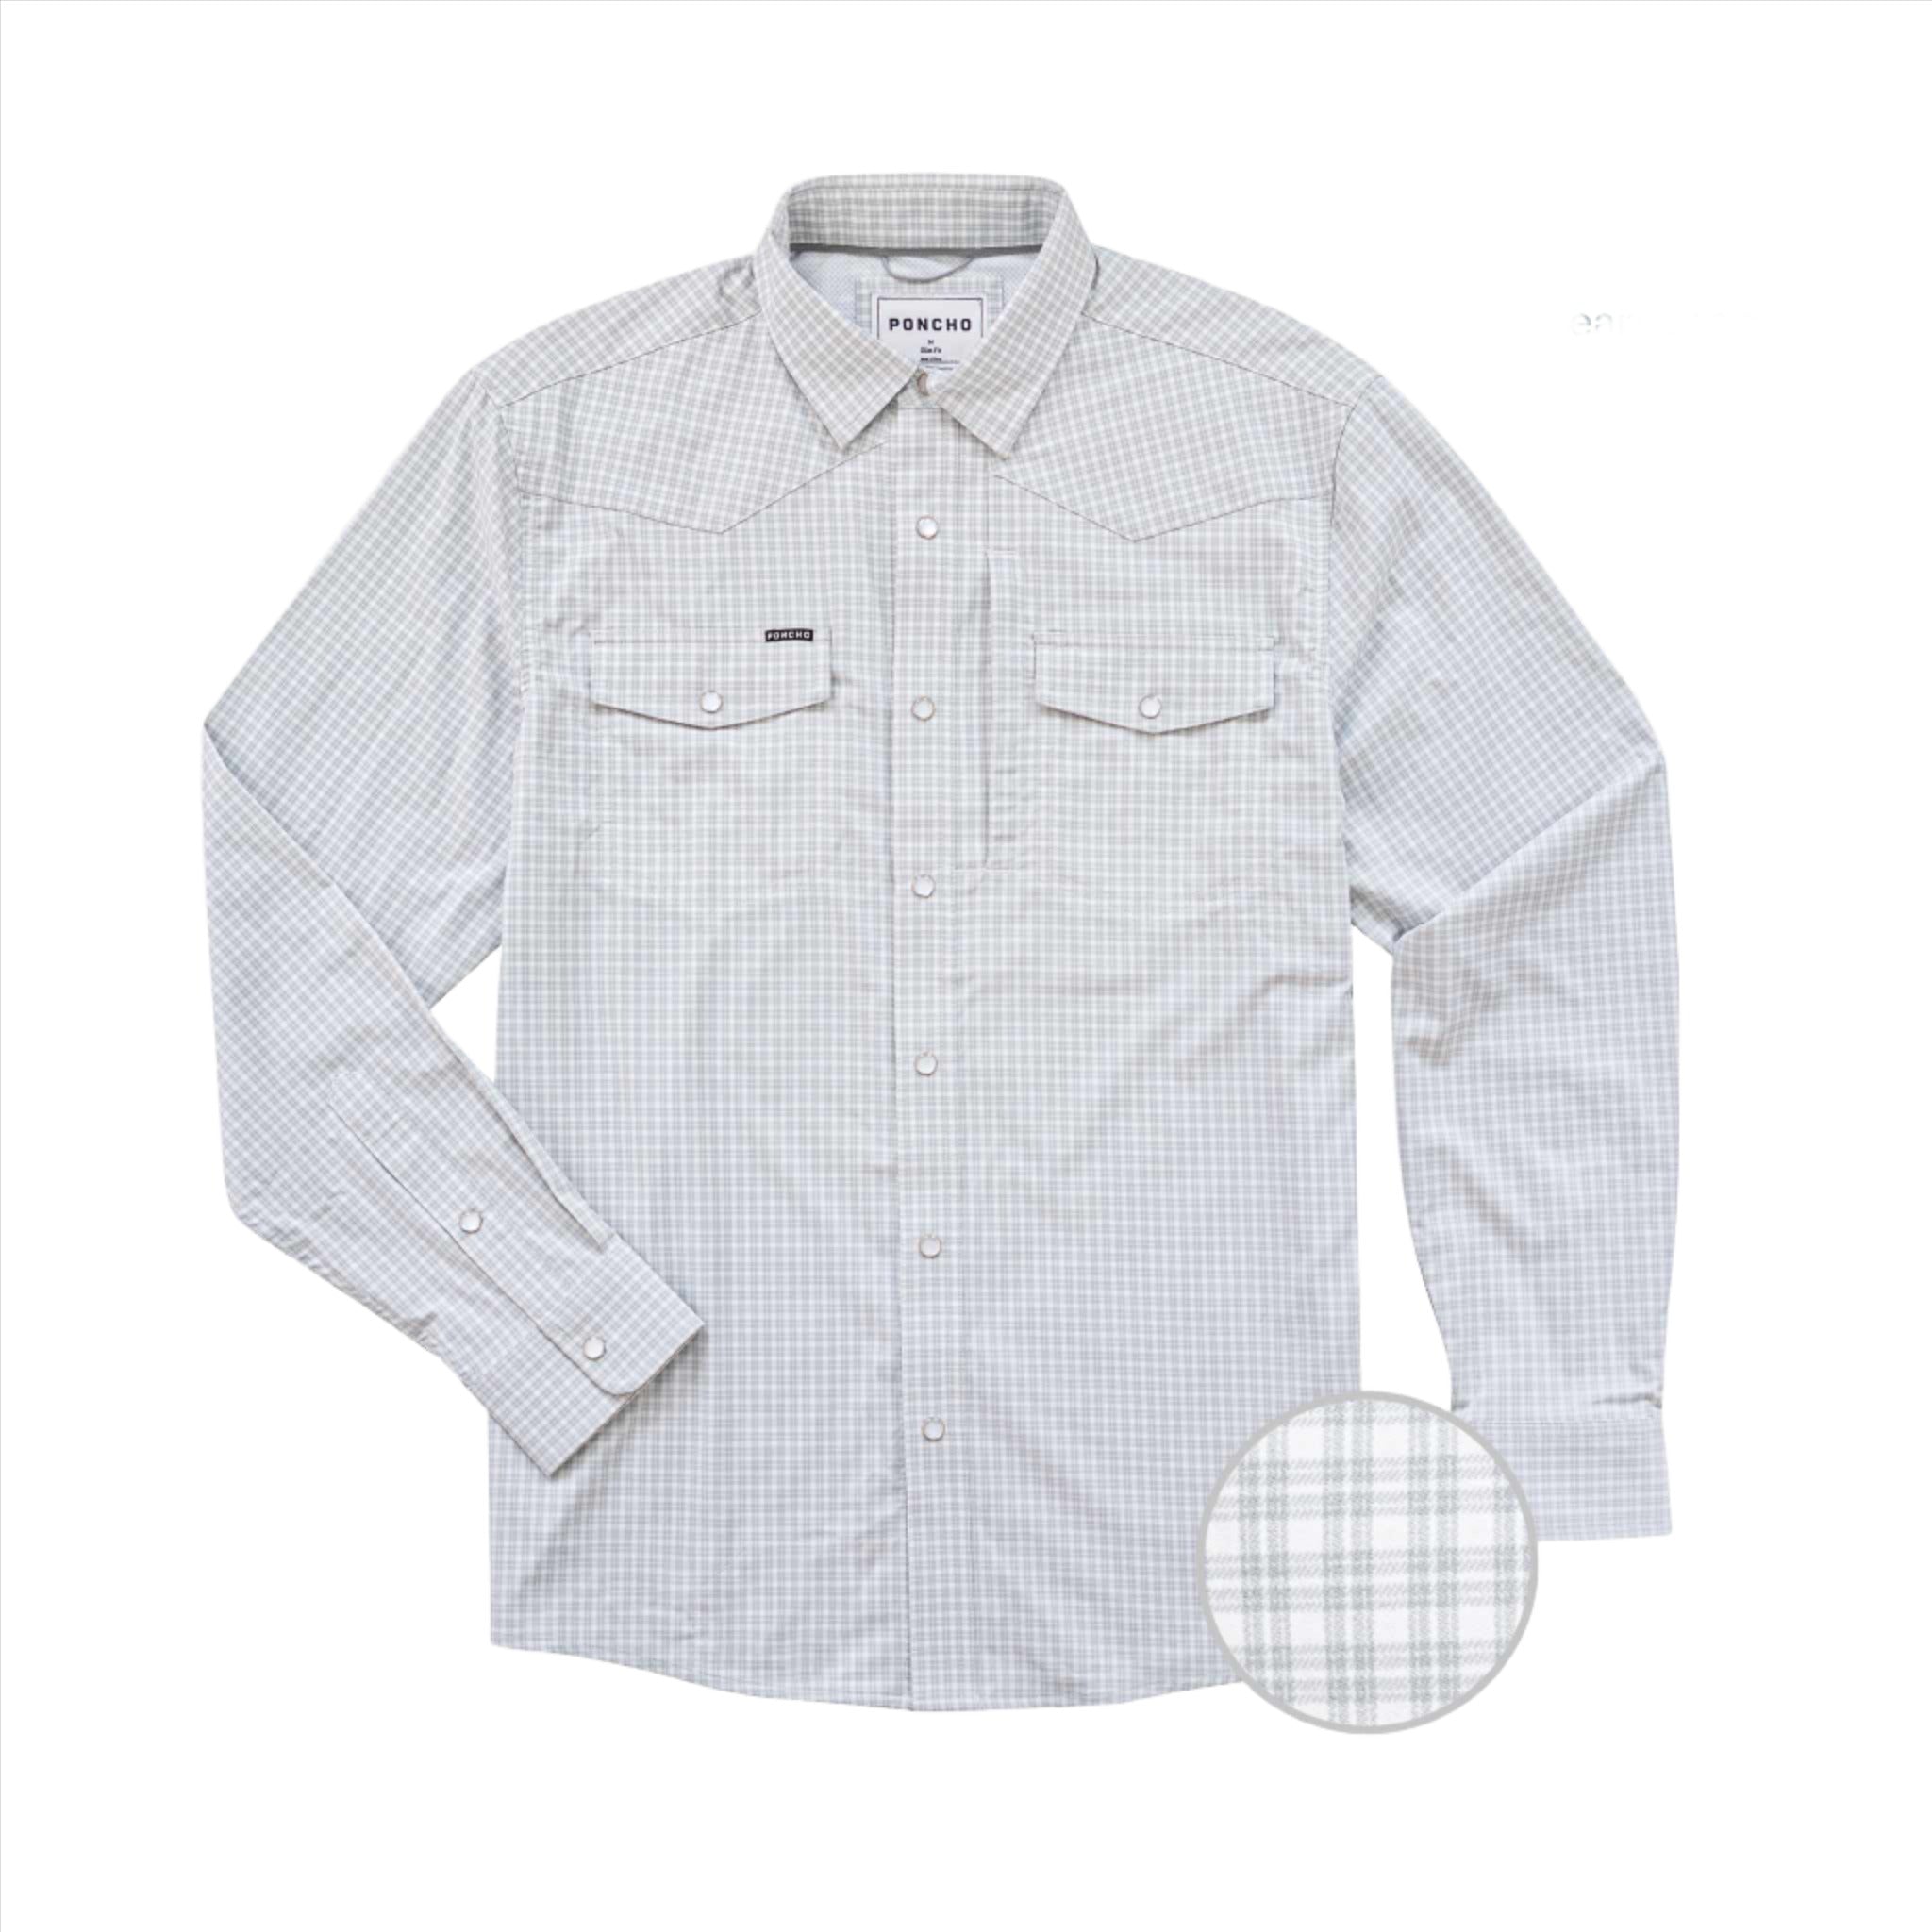 Poncho The Lonesome Dove Long Sleeve Shirt